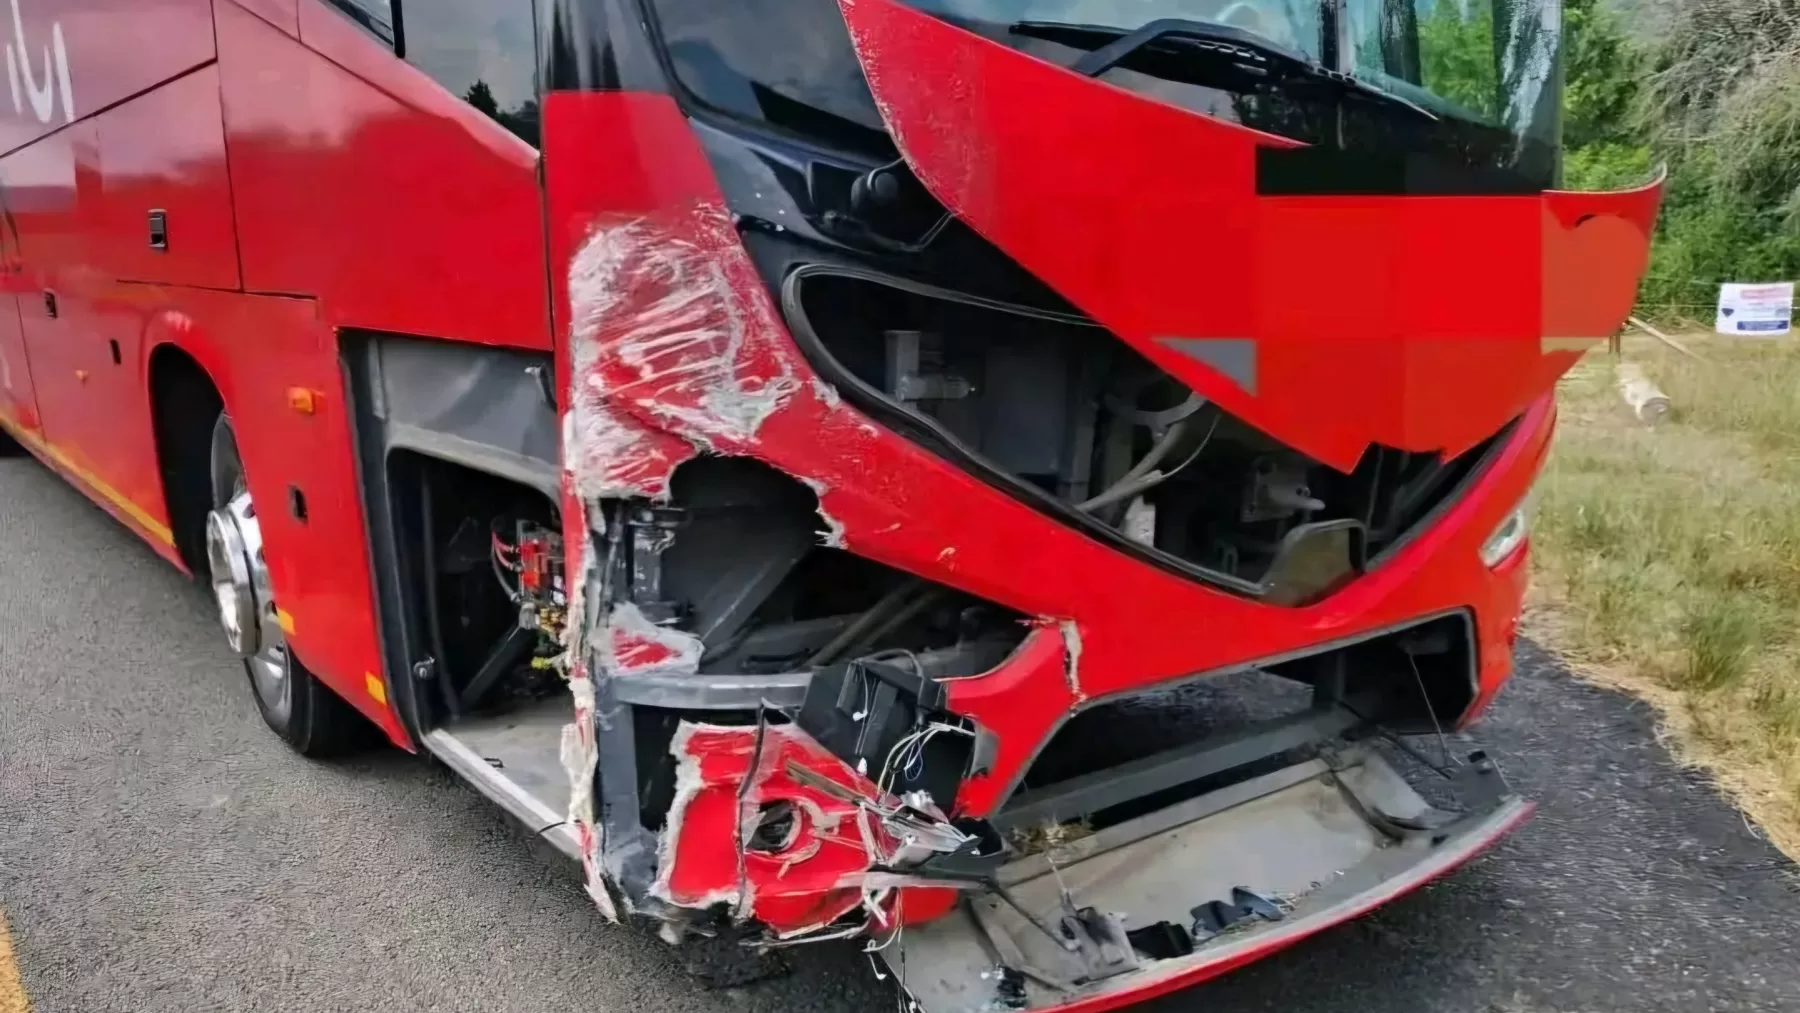 TS Galaxy wants the Sundowns fixture to be postponed after Bus accident 